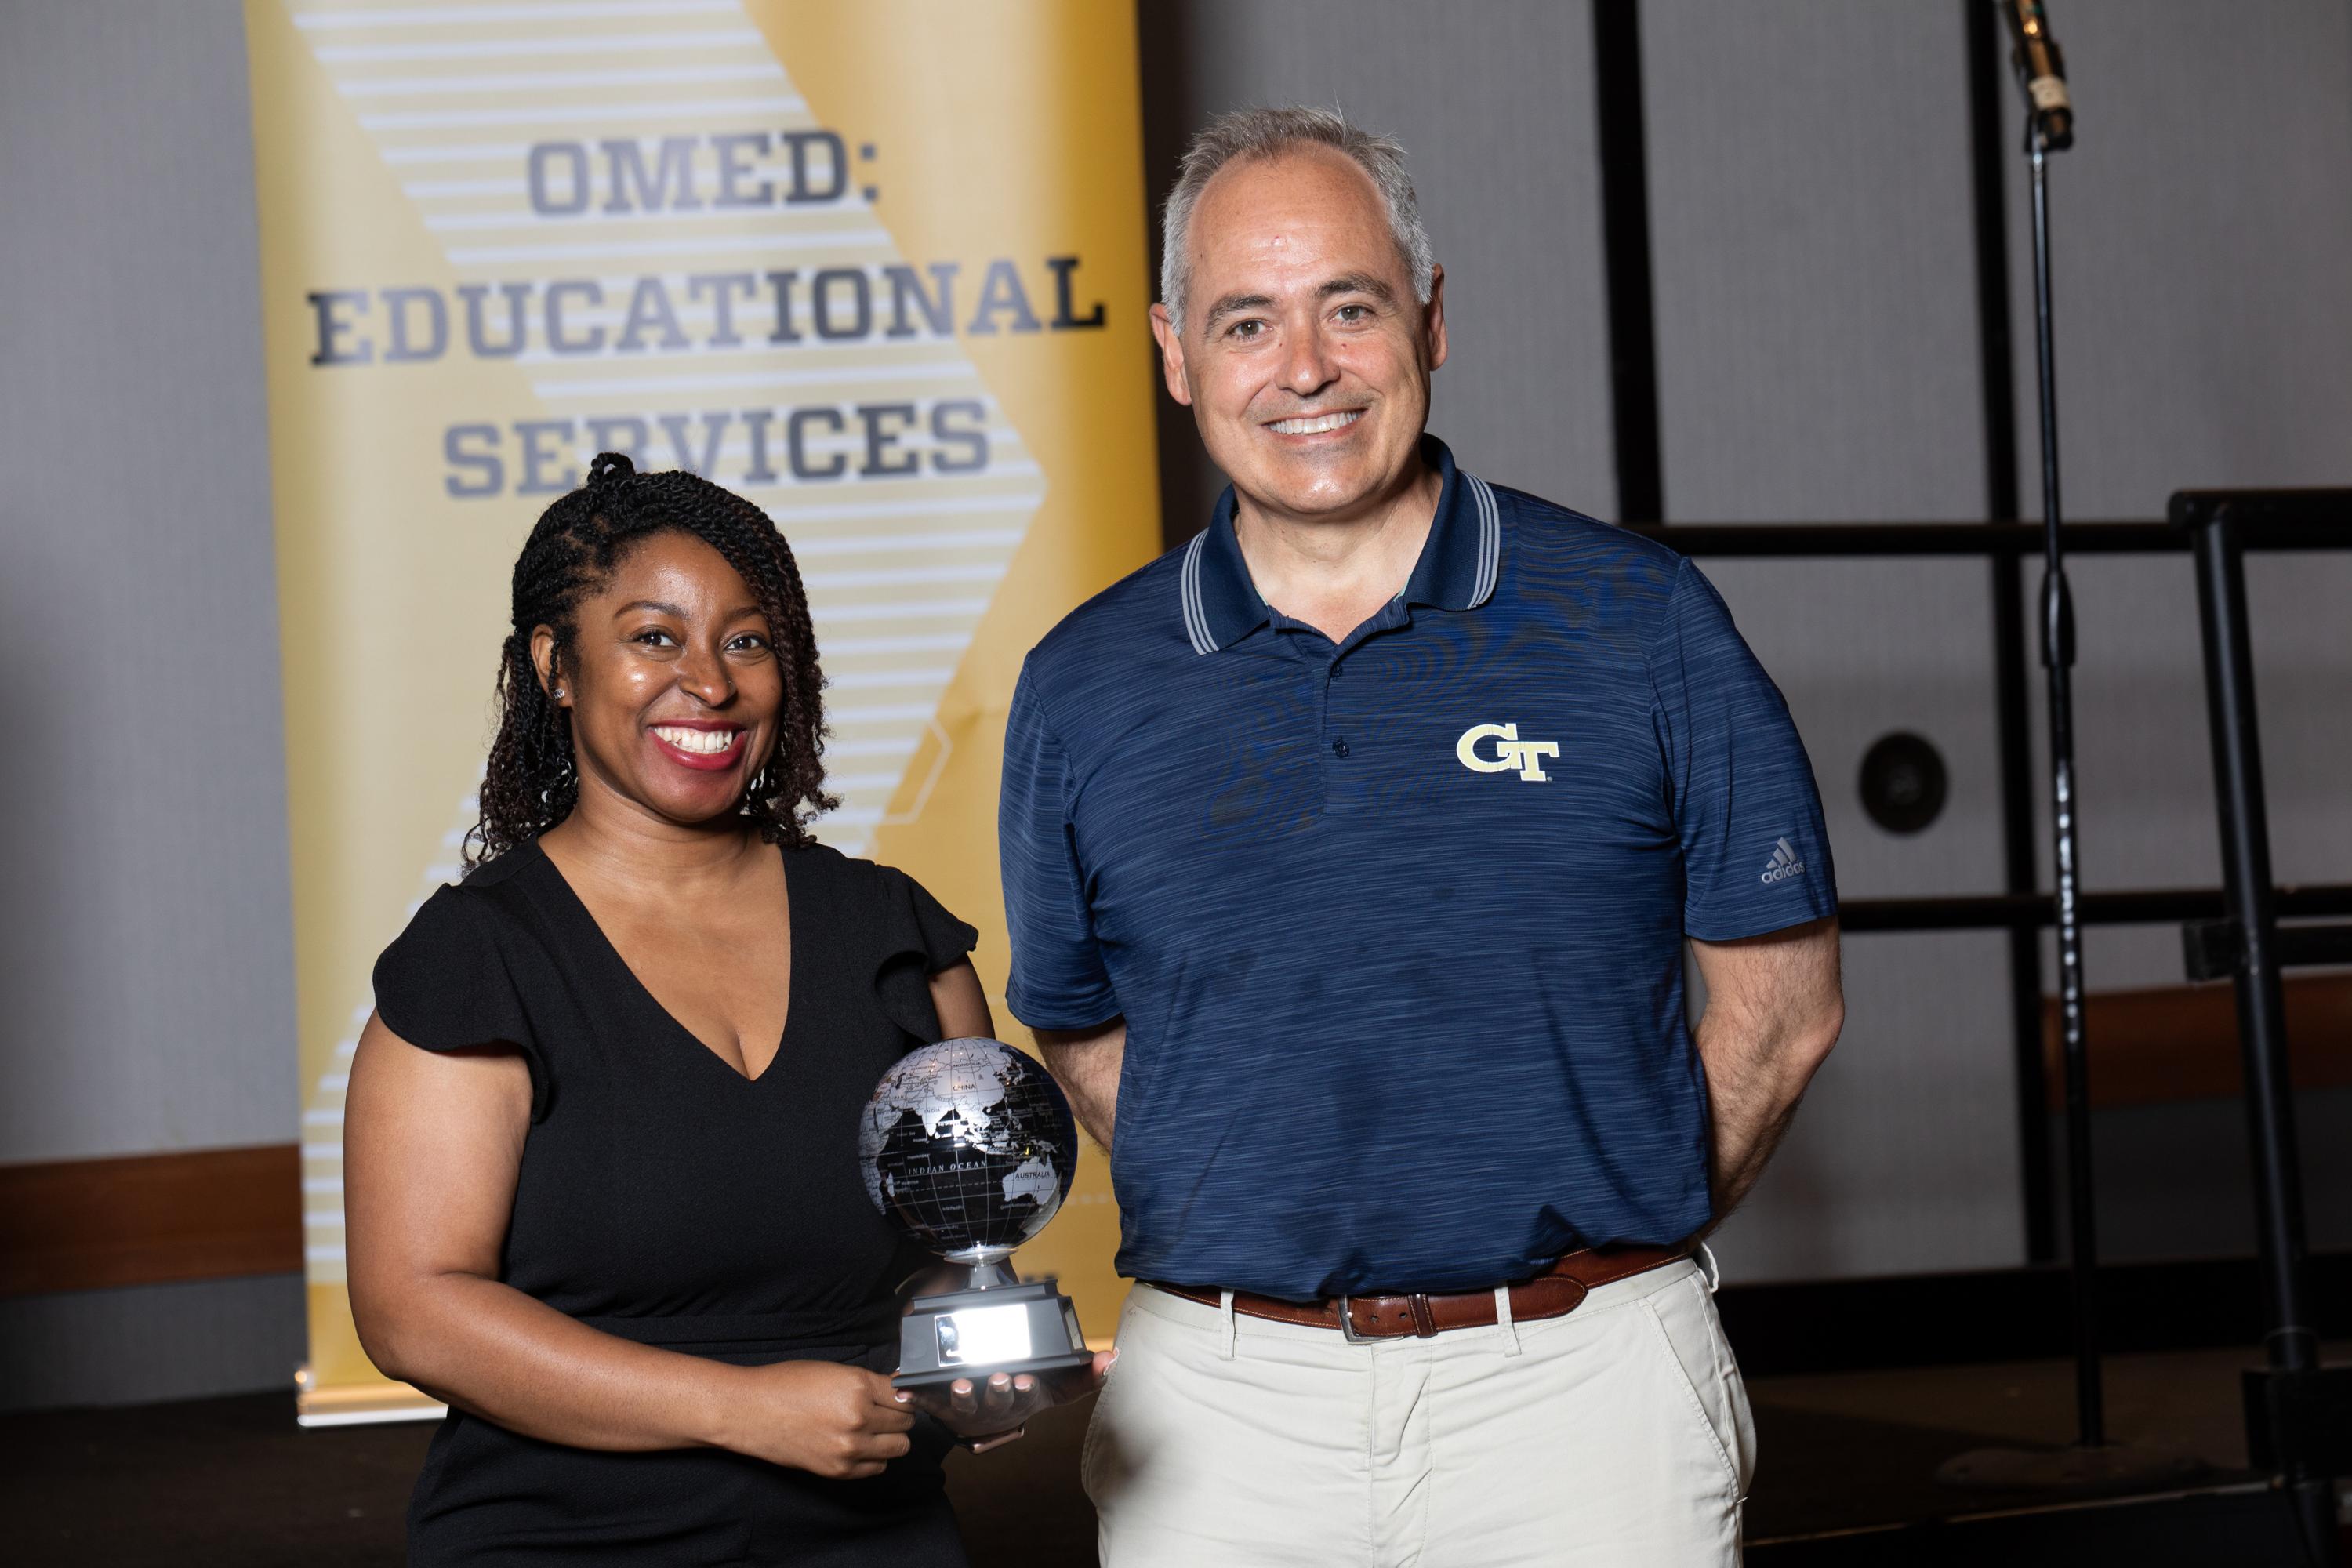 OMED Program and Operations Manager Markyta Holton poses with Georgia Tech President Ángel Cabrera at the three-week program's closing